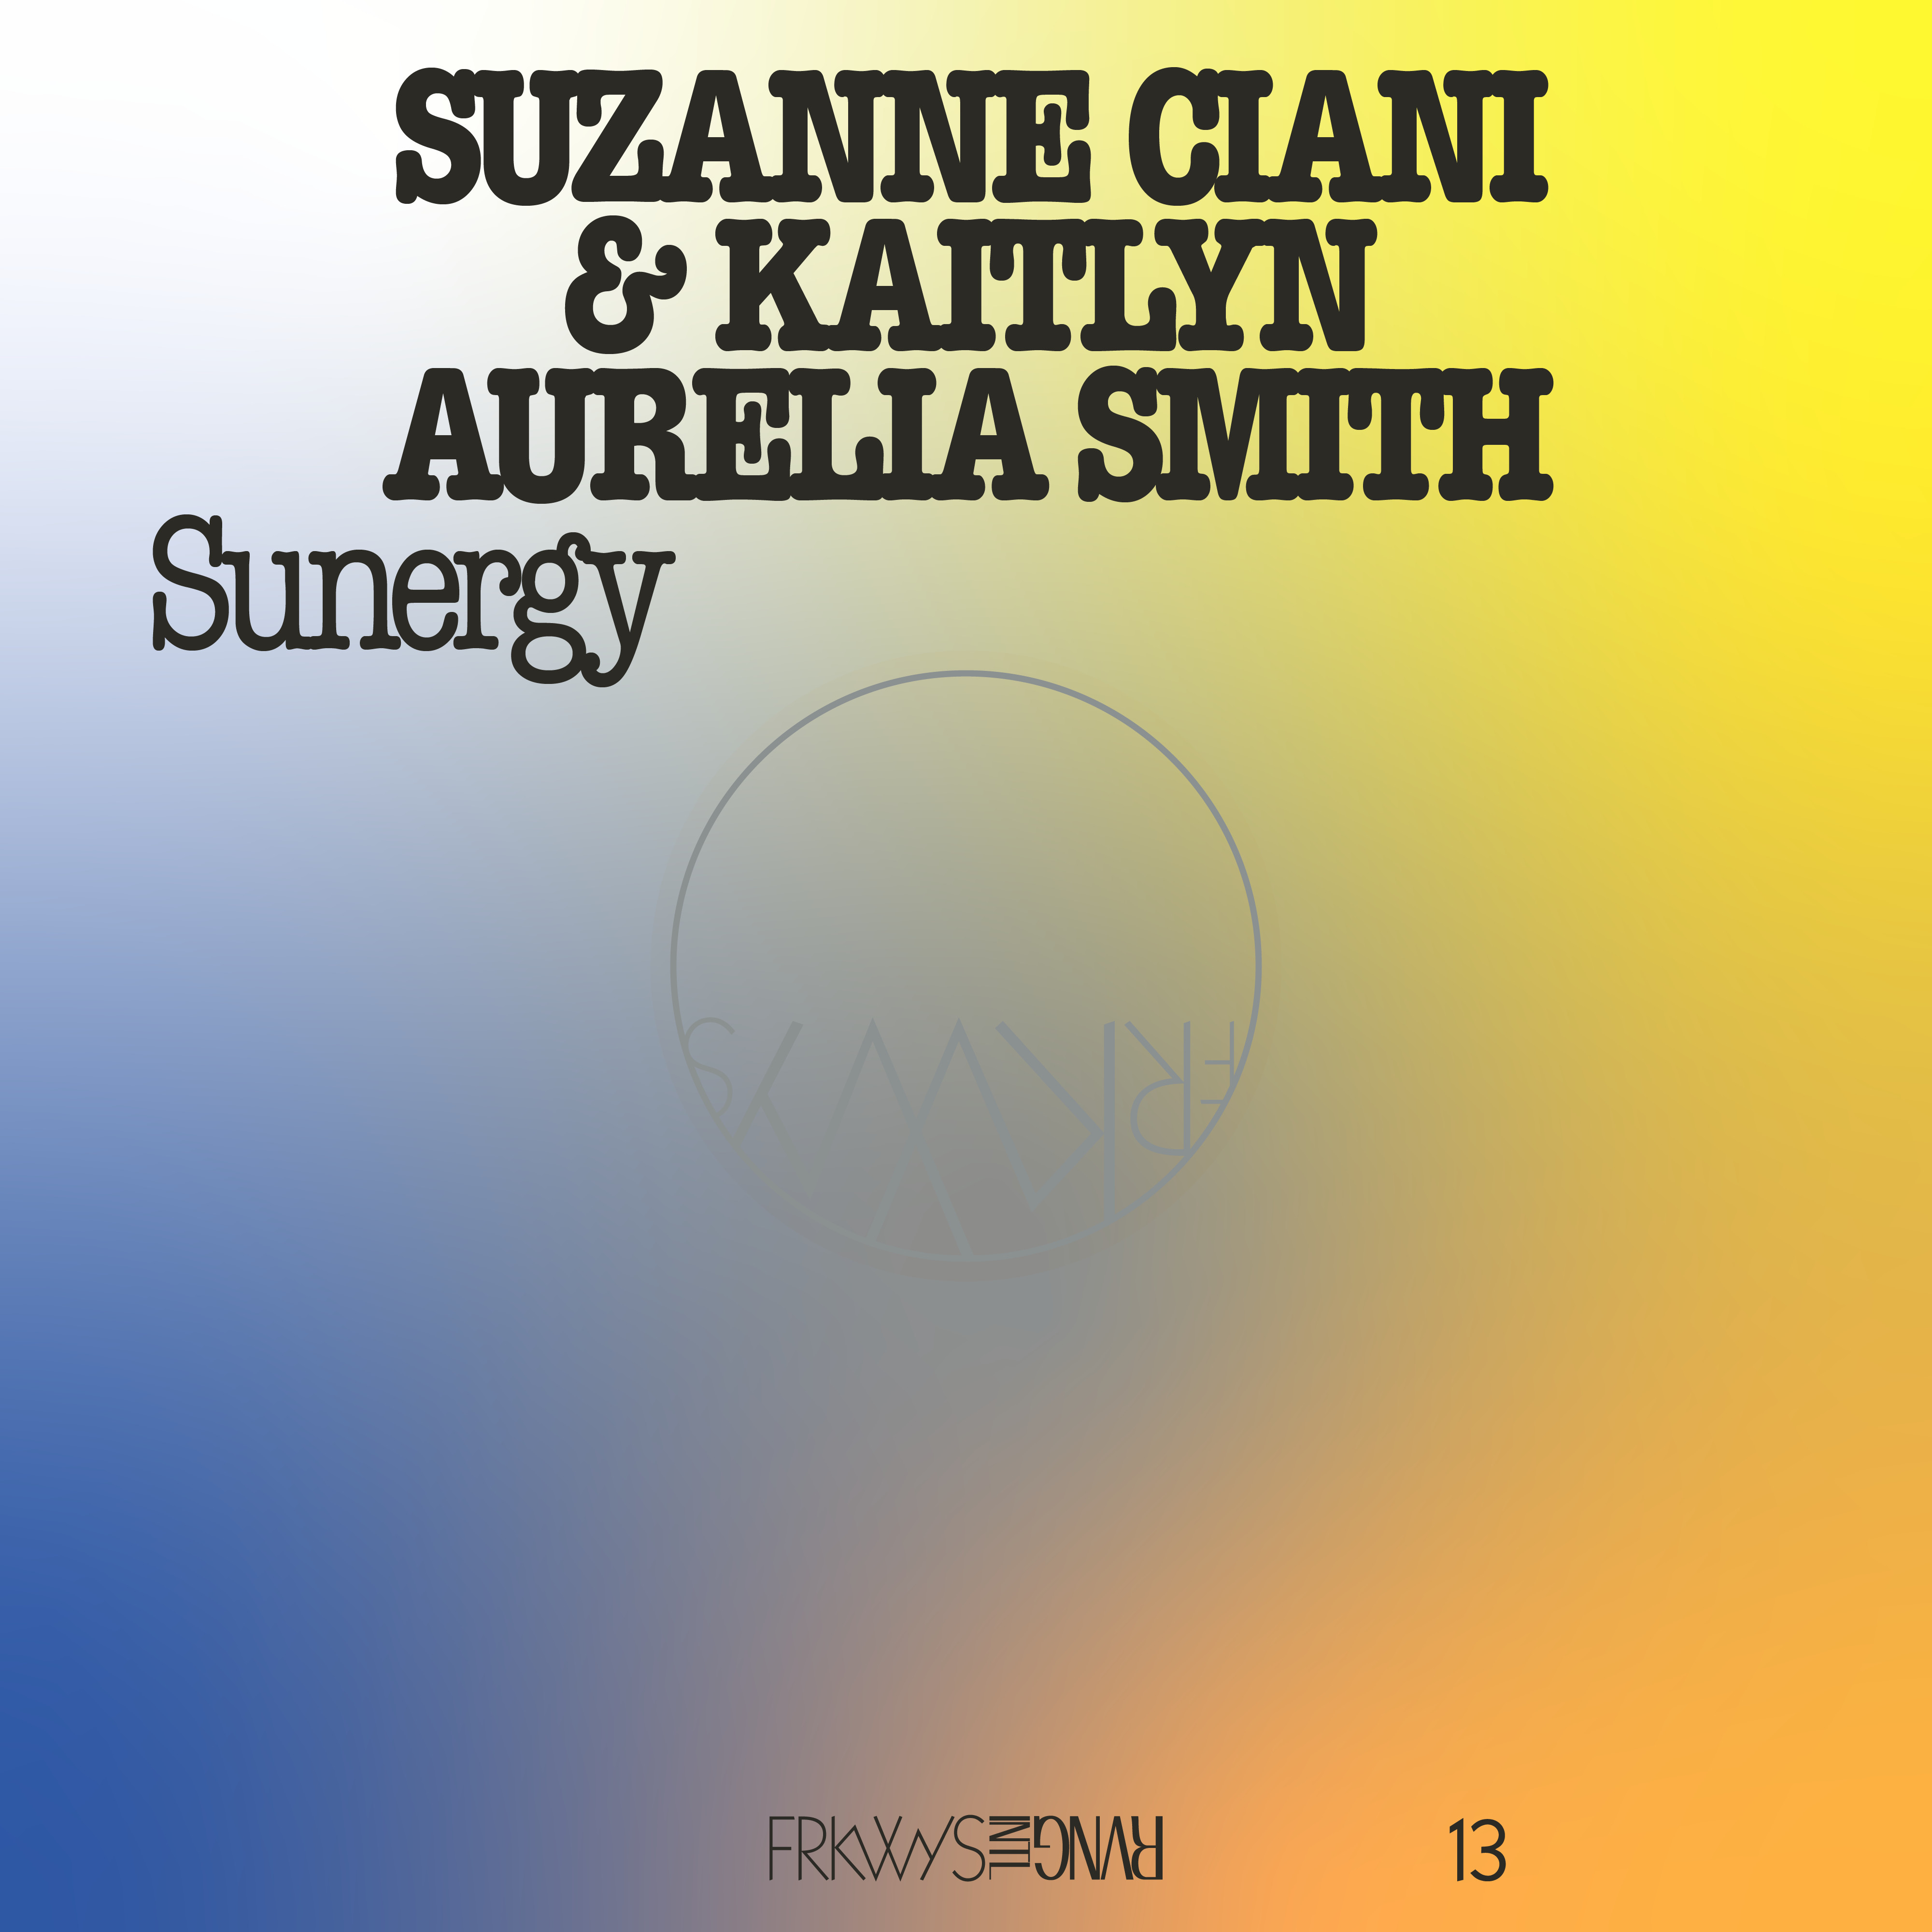 Suzanne Ciani & Kaitlyn Aurelia Smith - FRKWYS Vol. 13 - Sunergy (Expanded) : LP(blue) + DOWNLOAD CODE